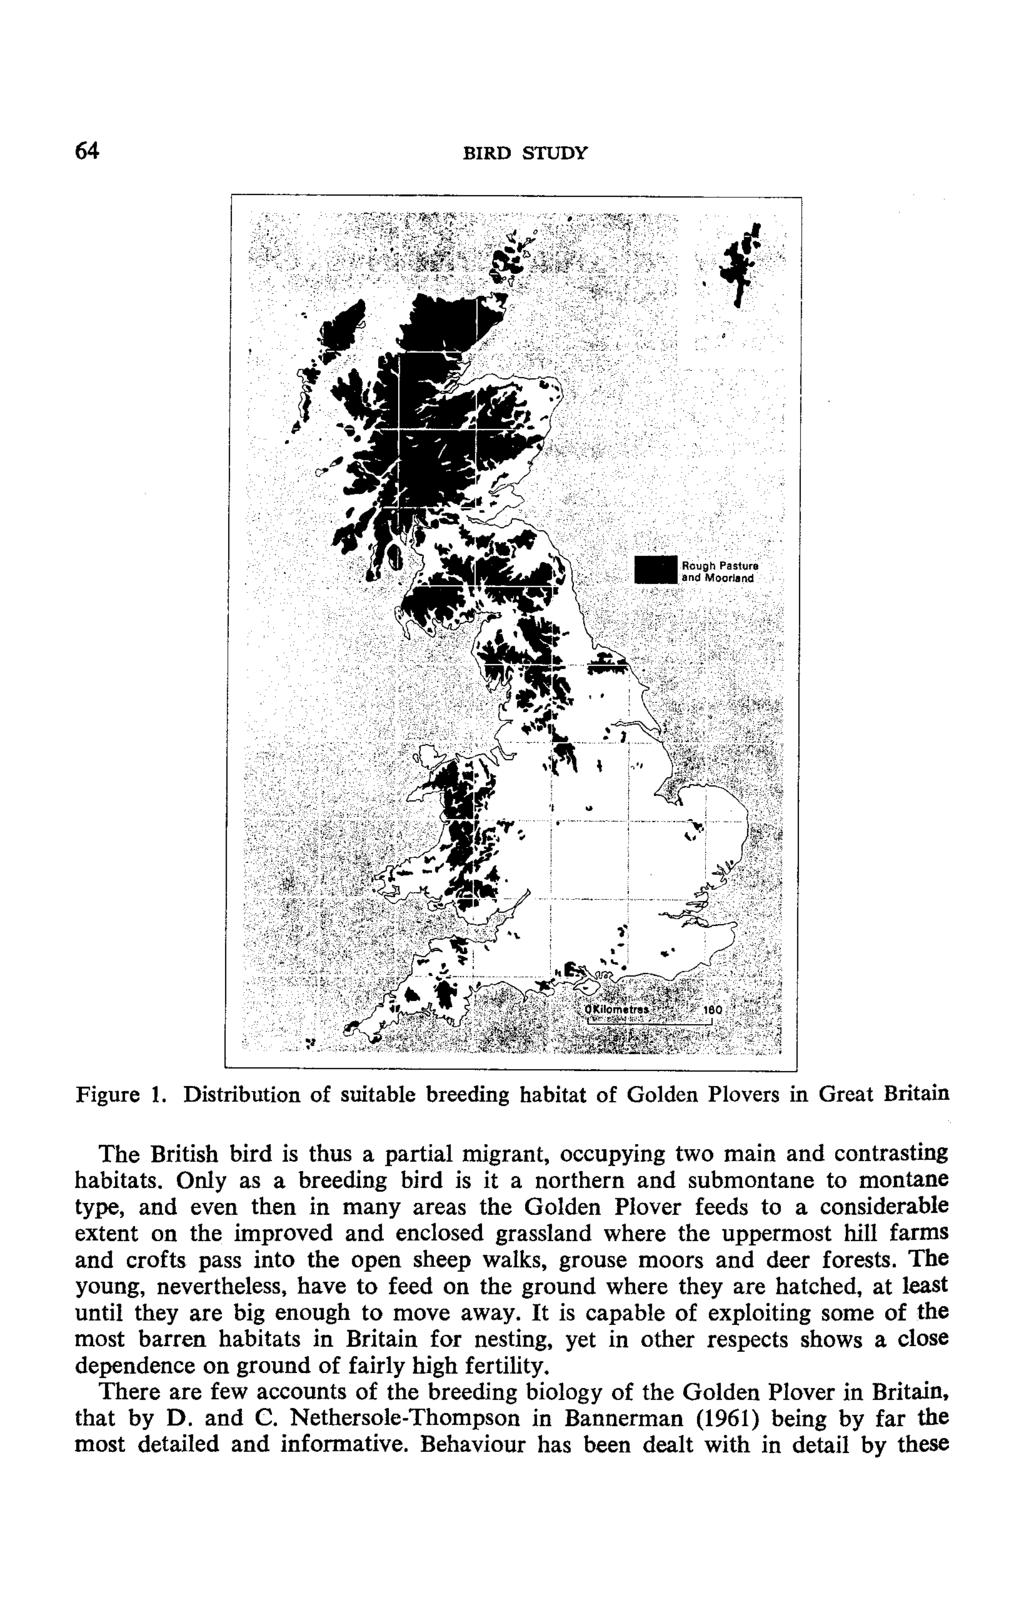 64 BIRD STUDY Figure 1. Distribution of suitable breeding habitat of Golden Plovers in Great Britain The British bird is thus a partial migrant, occupying two main and contrasting habitats.